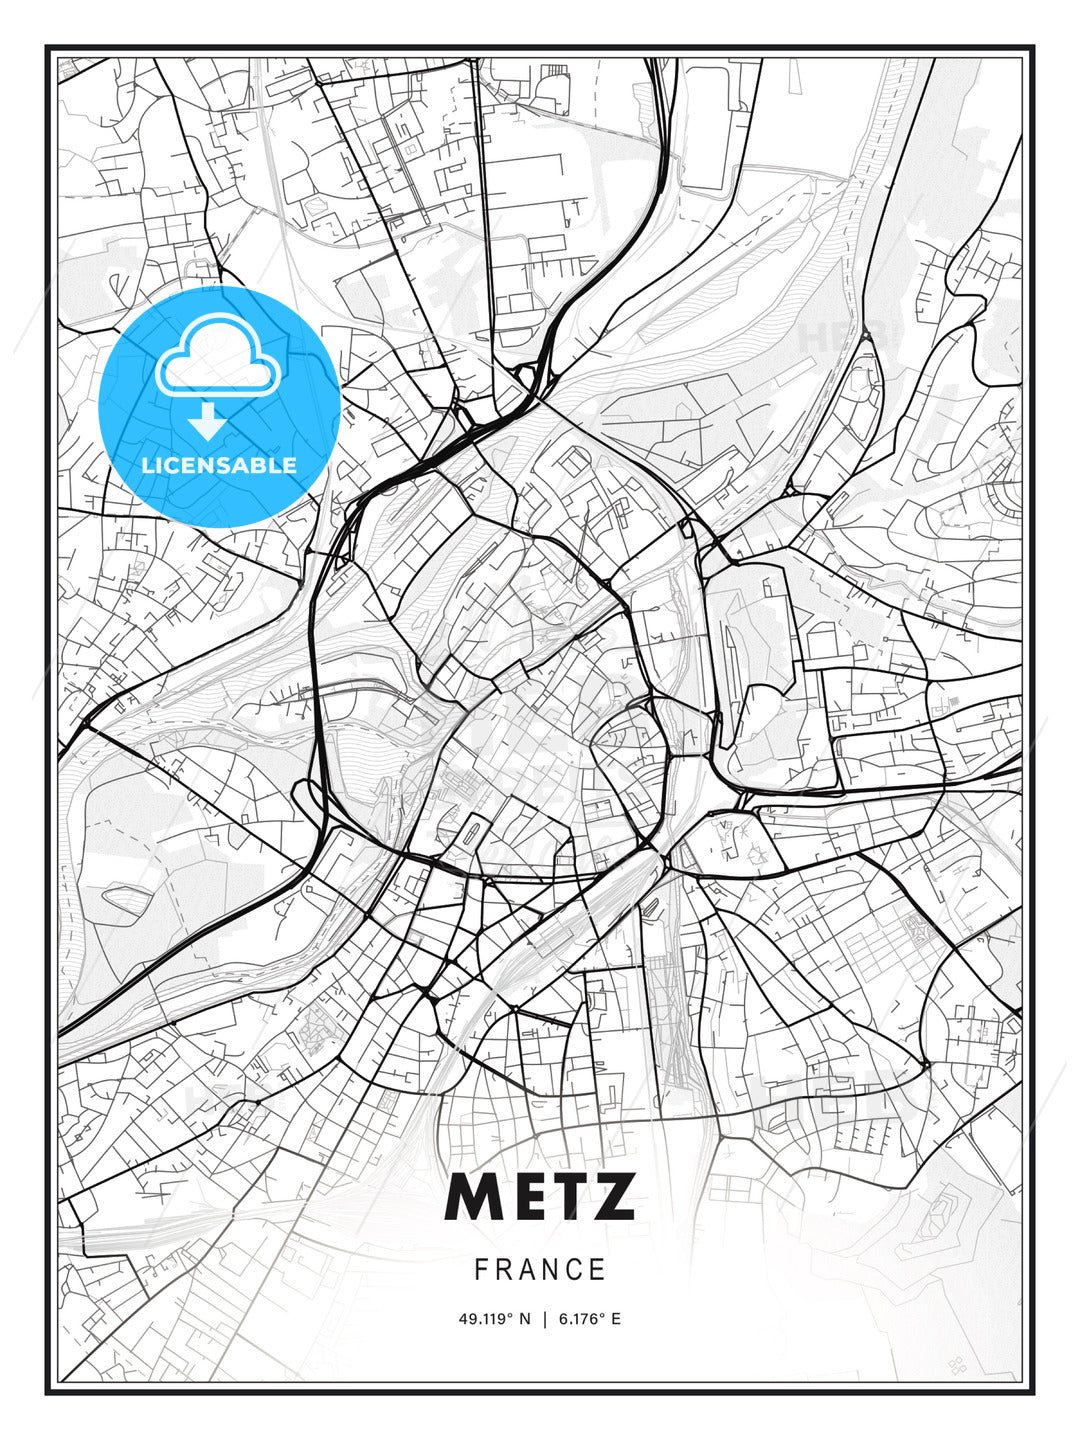 Metz, France, Modern Print Template in Various Formats - HEBSTREITS Sketches